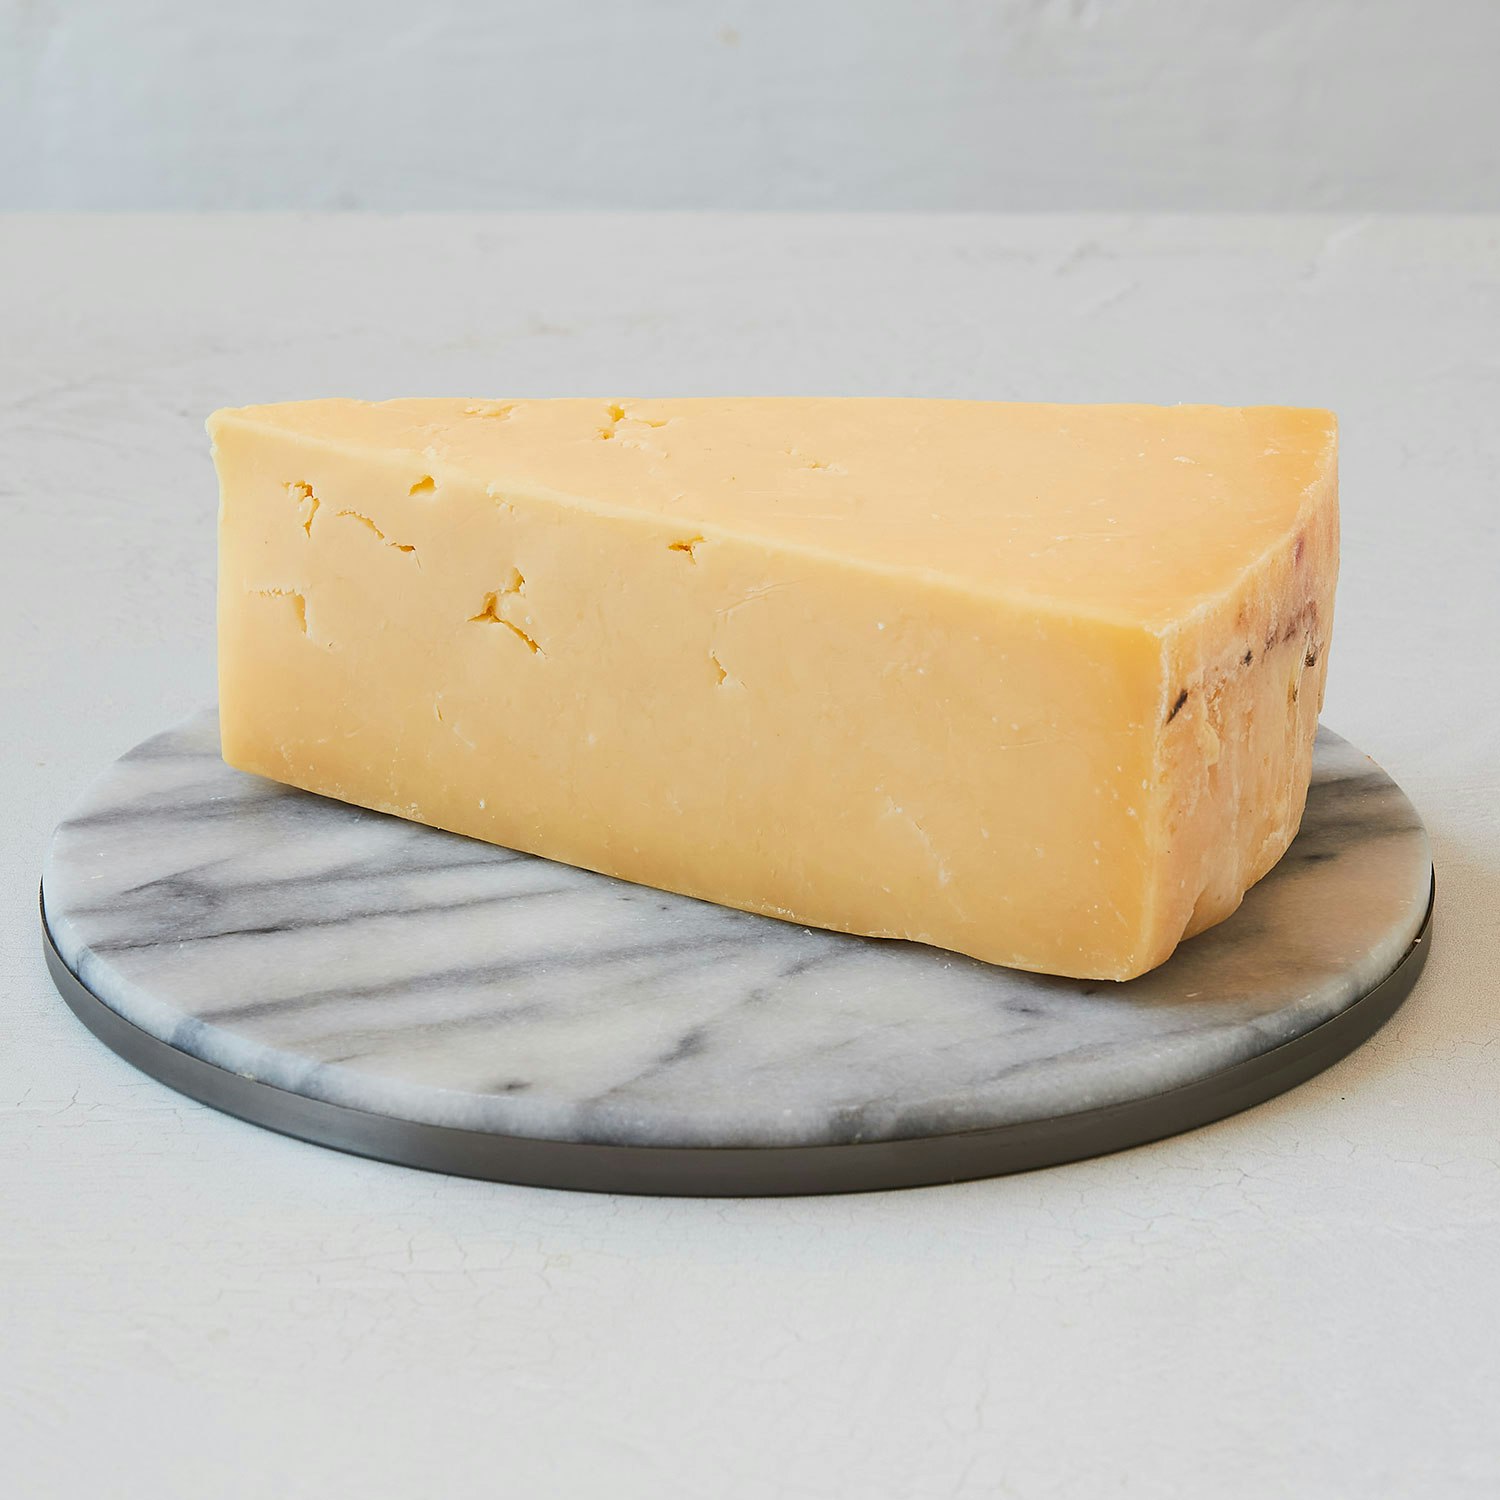 quicke's mature cheddar cheese